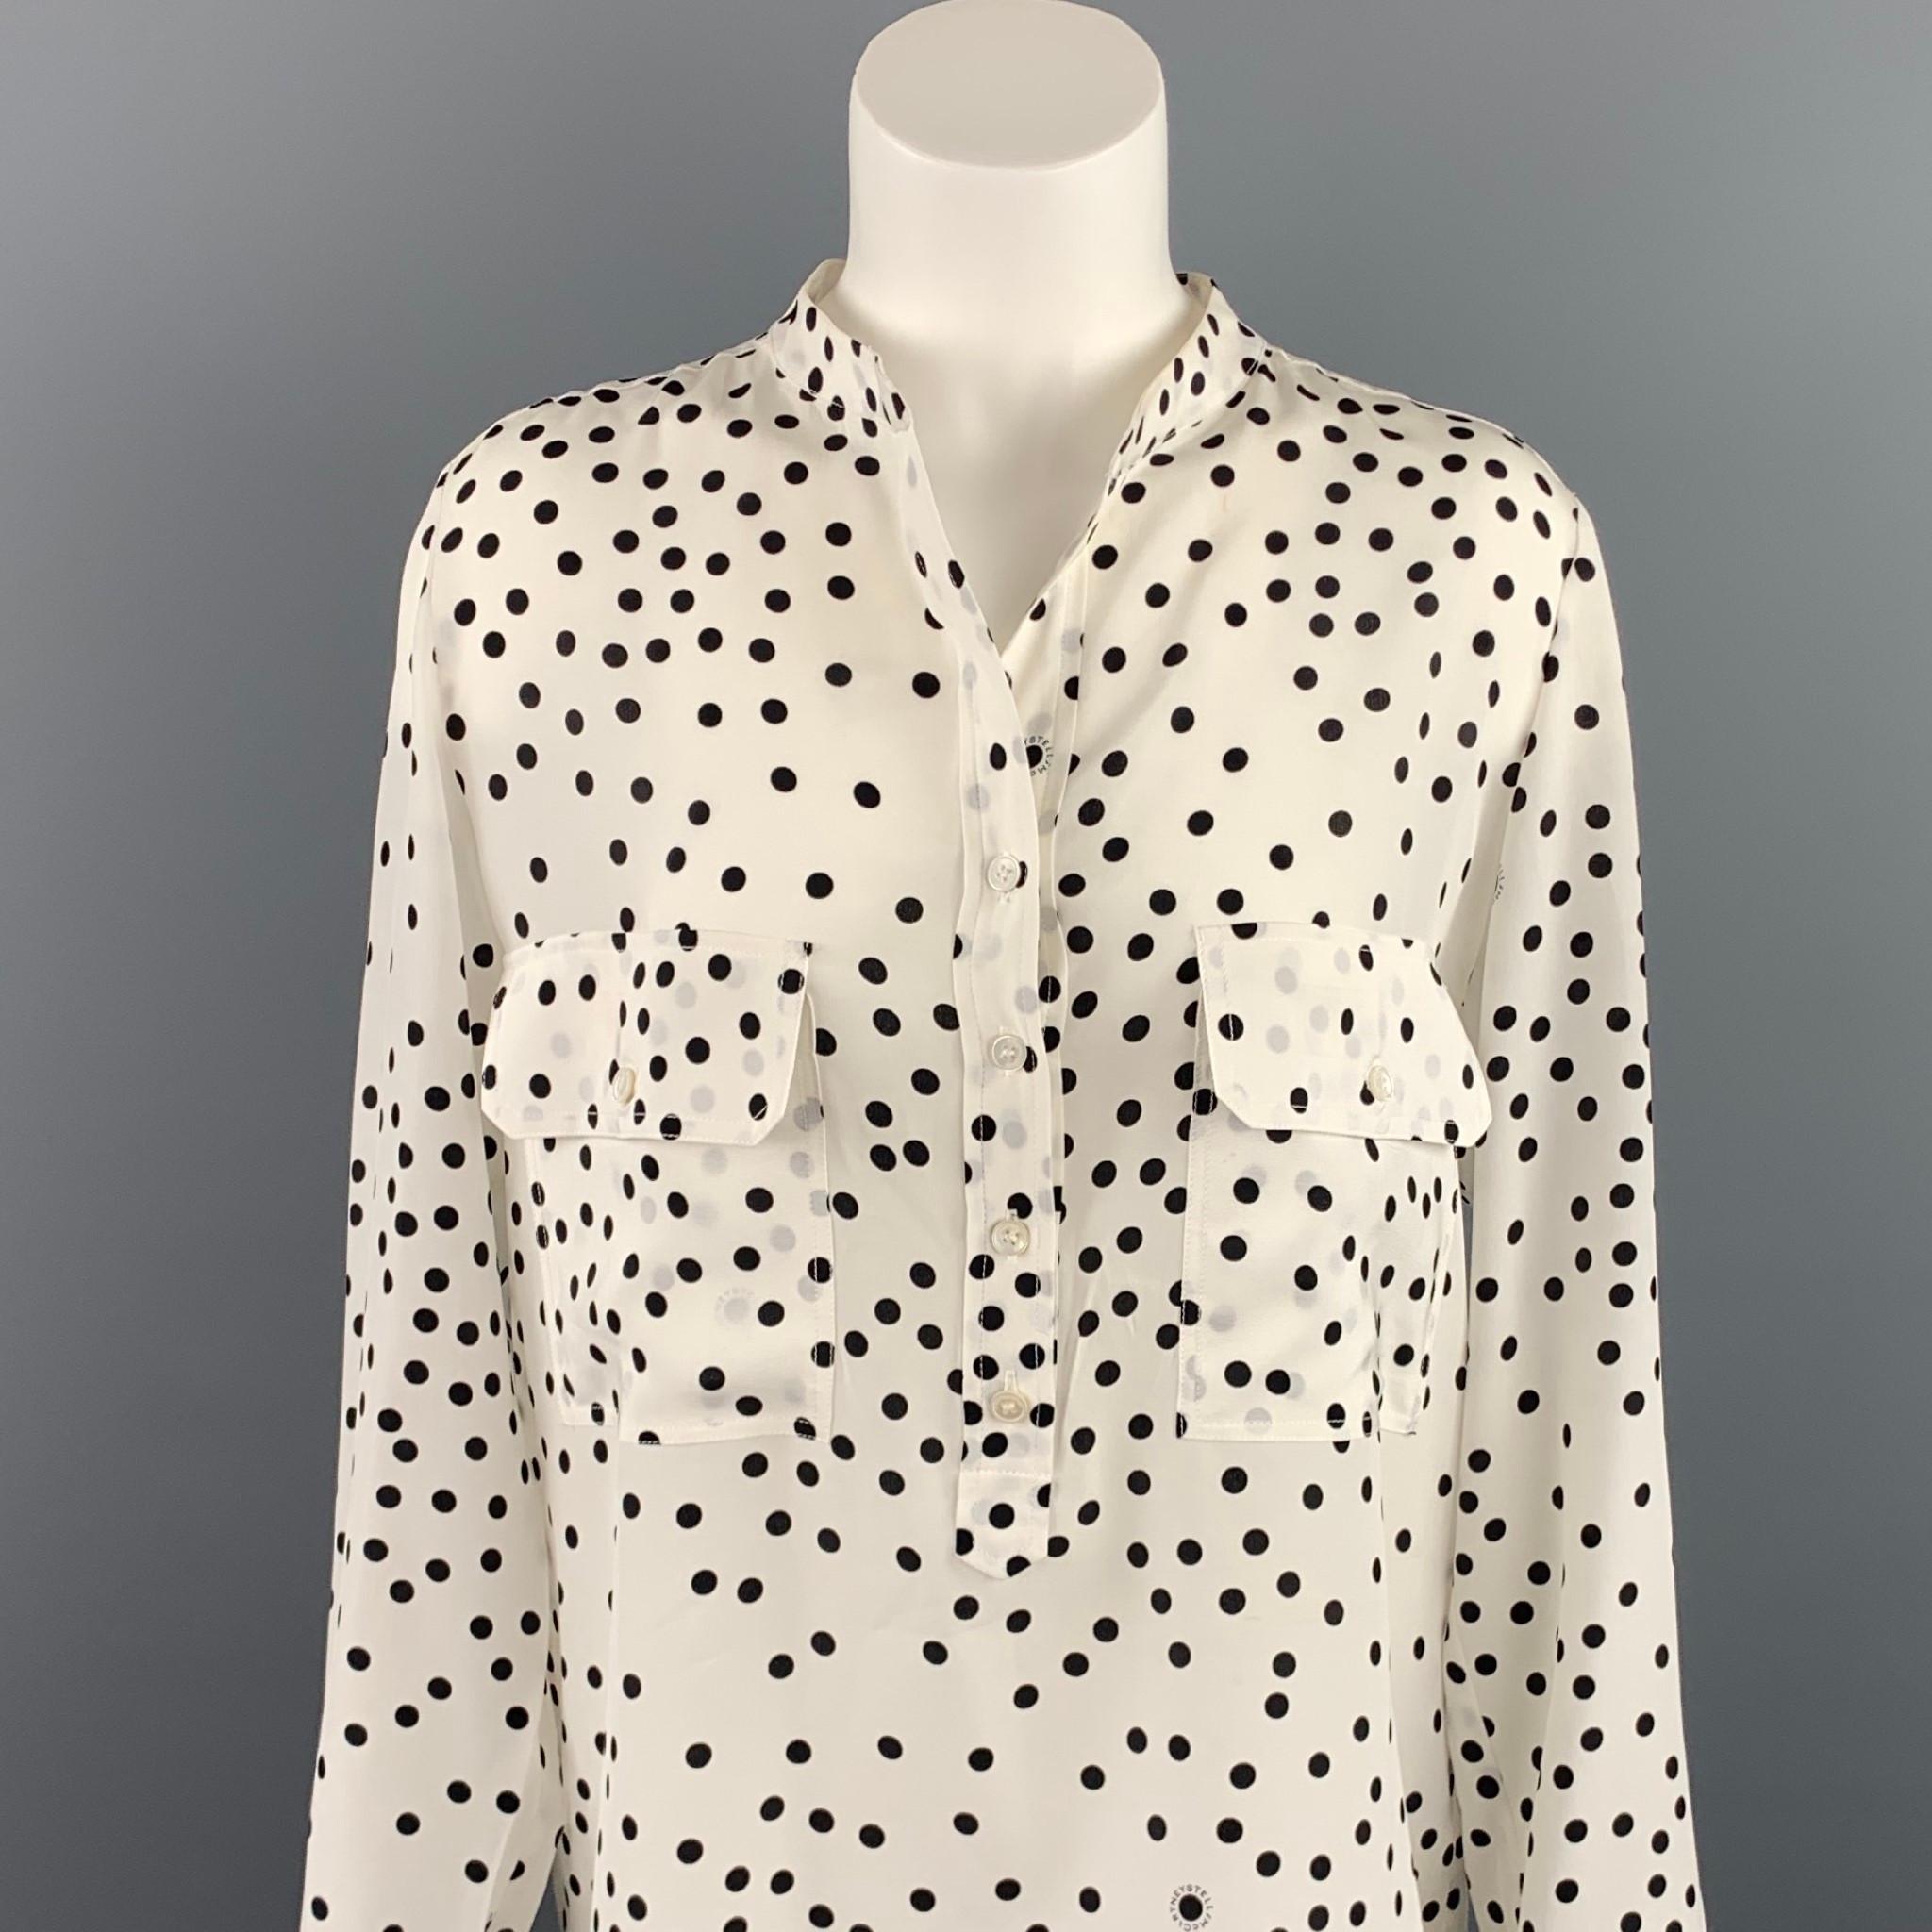 STELLA McCARTNEY blouse comes in a black & white dot print silk featuring pockets, collarless, and a half buttoned closure.

Very Good Pre-Owned Condition.
Marked: 42    
Original Retail Price: $960.00

Measurements:

Shoulder: 15 in. 
Bust: 42 in.